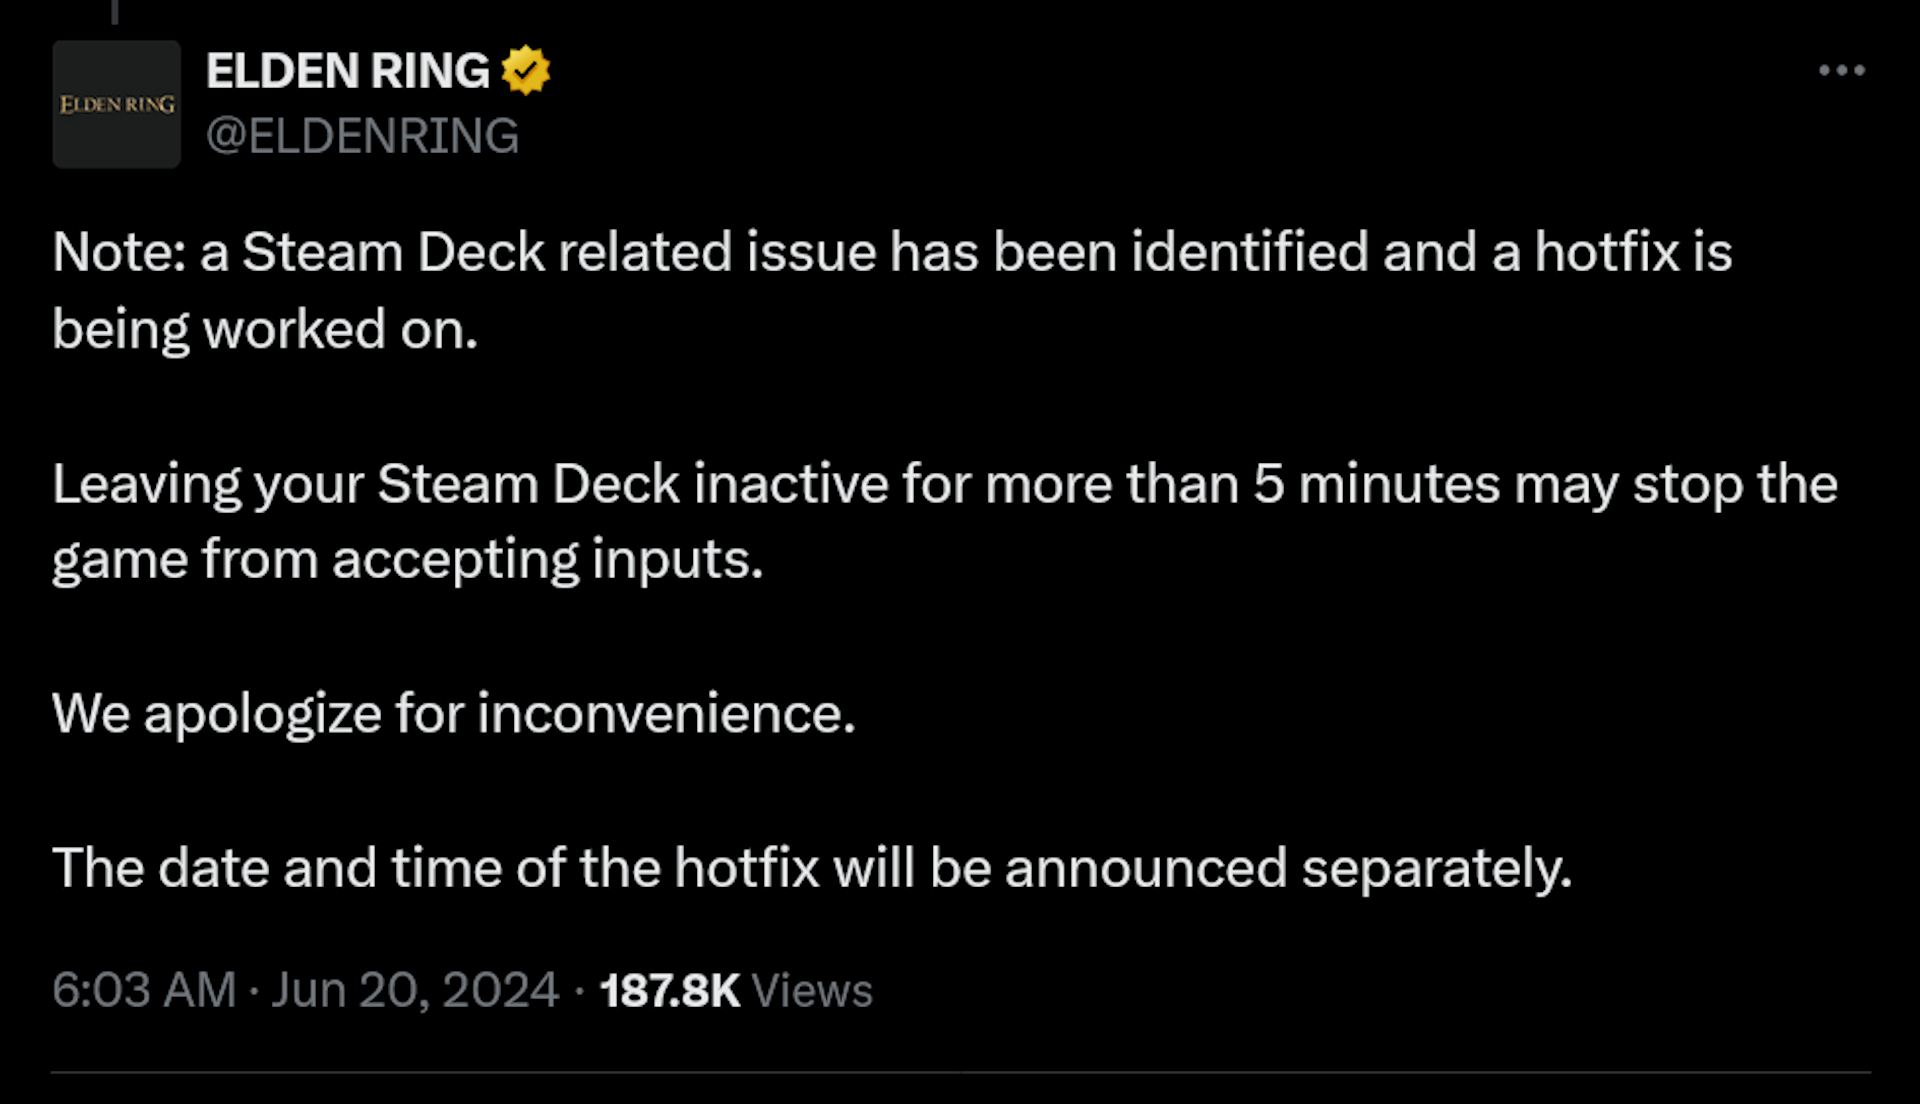 Note: a Steam Deck related issue has been identified and a hotfix is being worked on.  Leaving your Steam Deck inactive for more than 5 minutes may stop the game from accepting inputs.  We apologize for inconvenience.  The date and time of the hotfix will be announced separately.